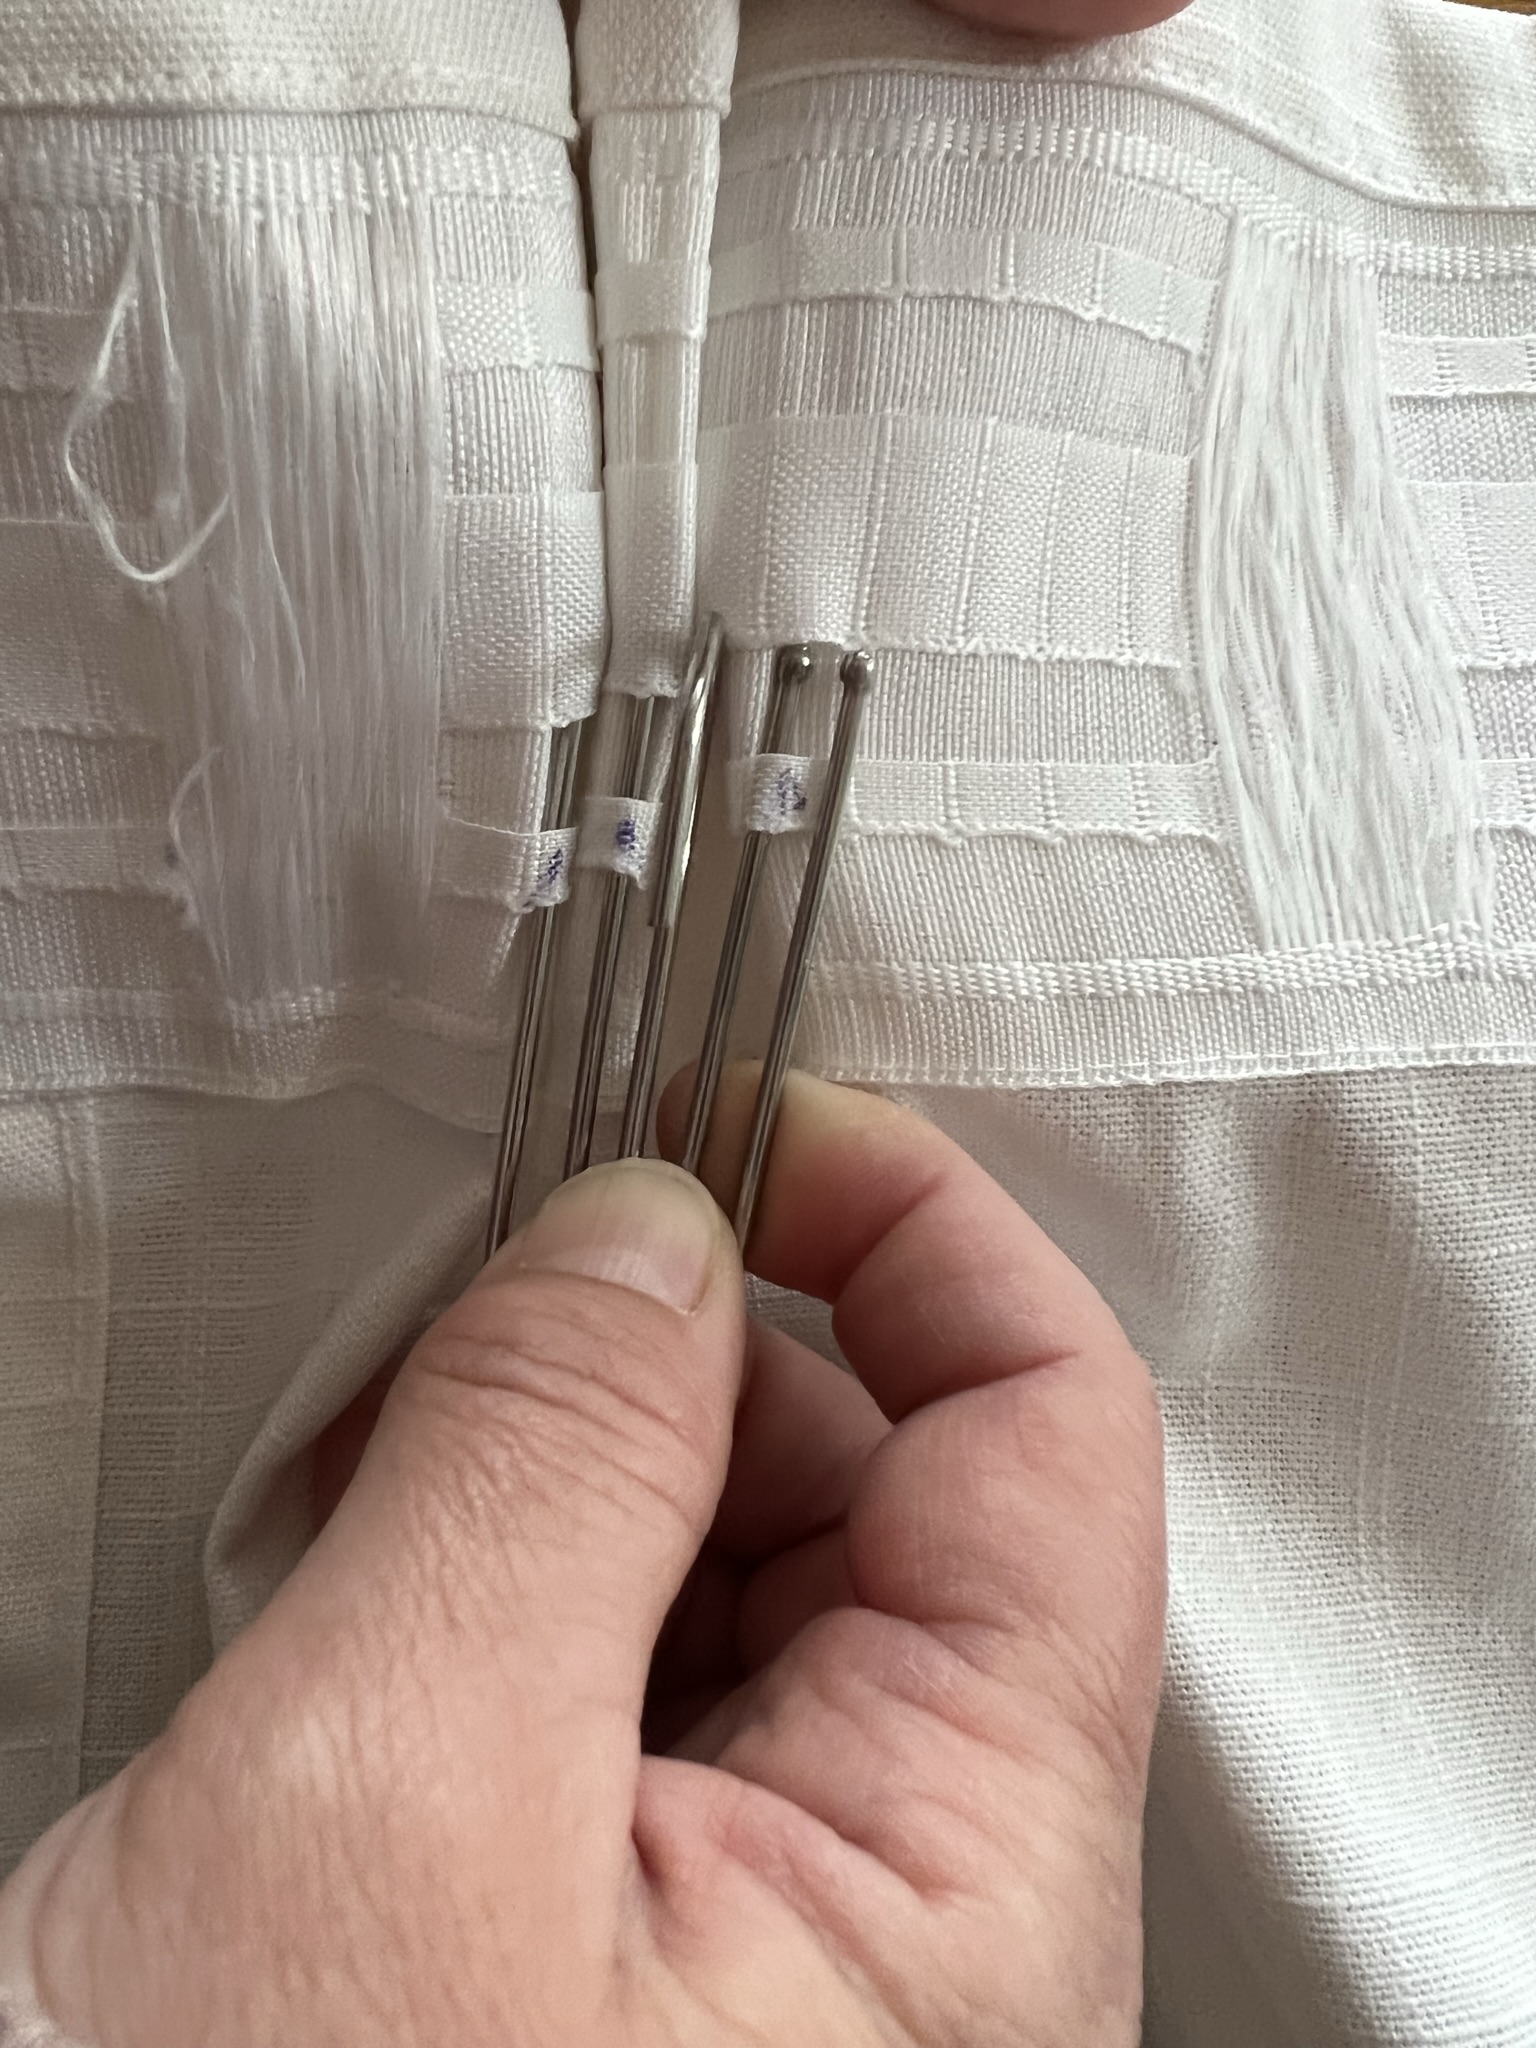 Inserting the third prong of the triple pleat curtain hook into the curtain tape